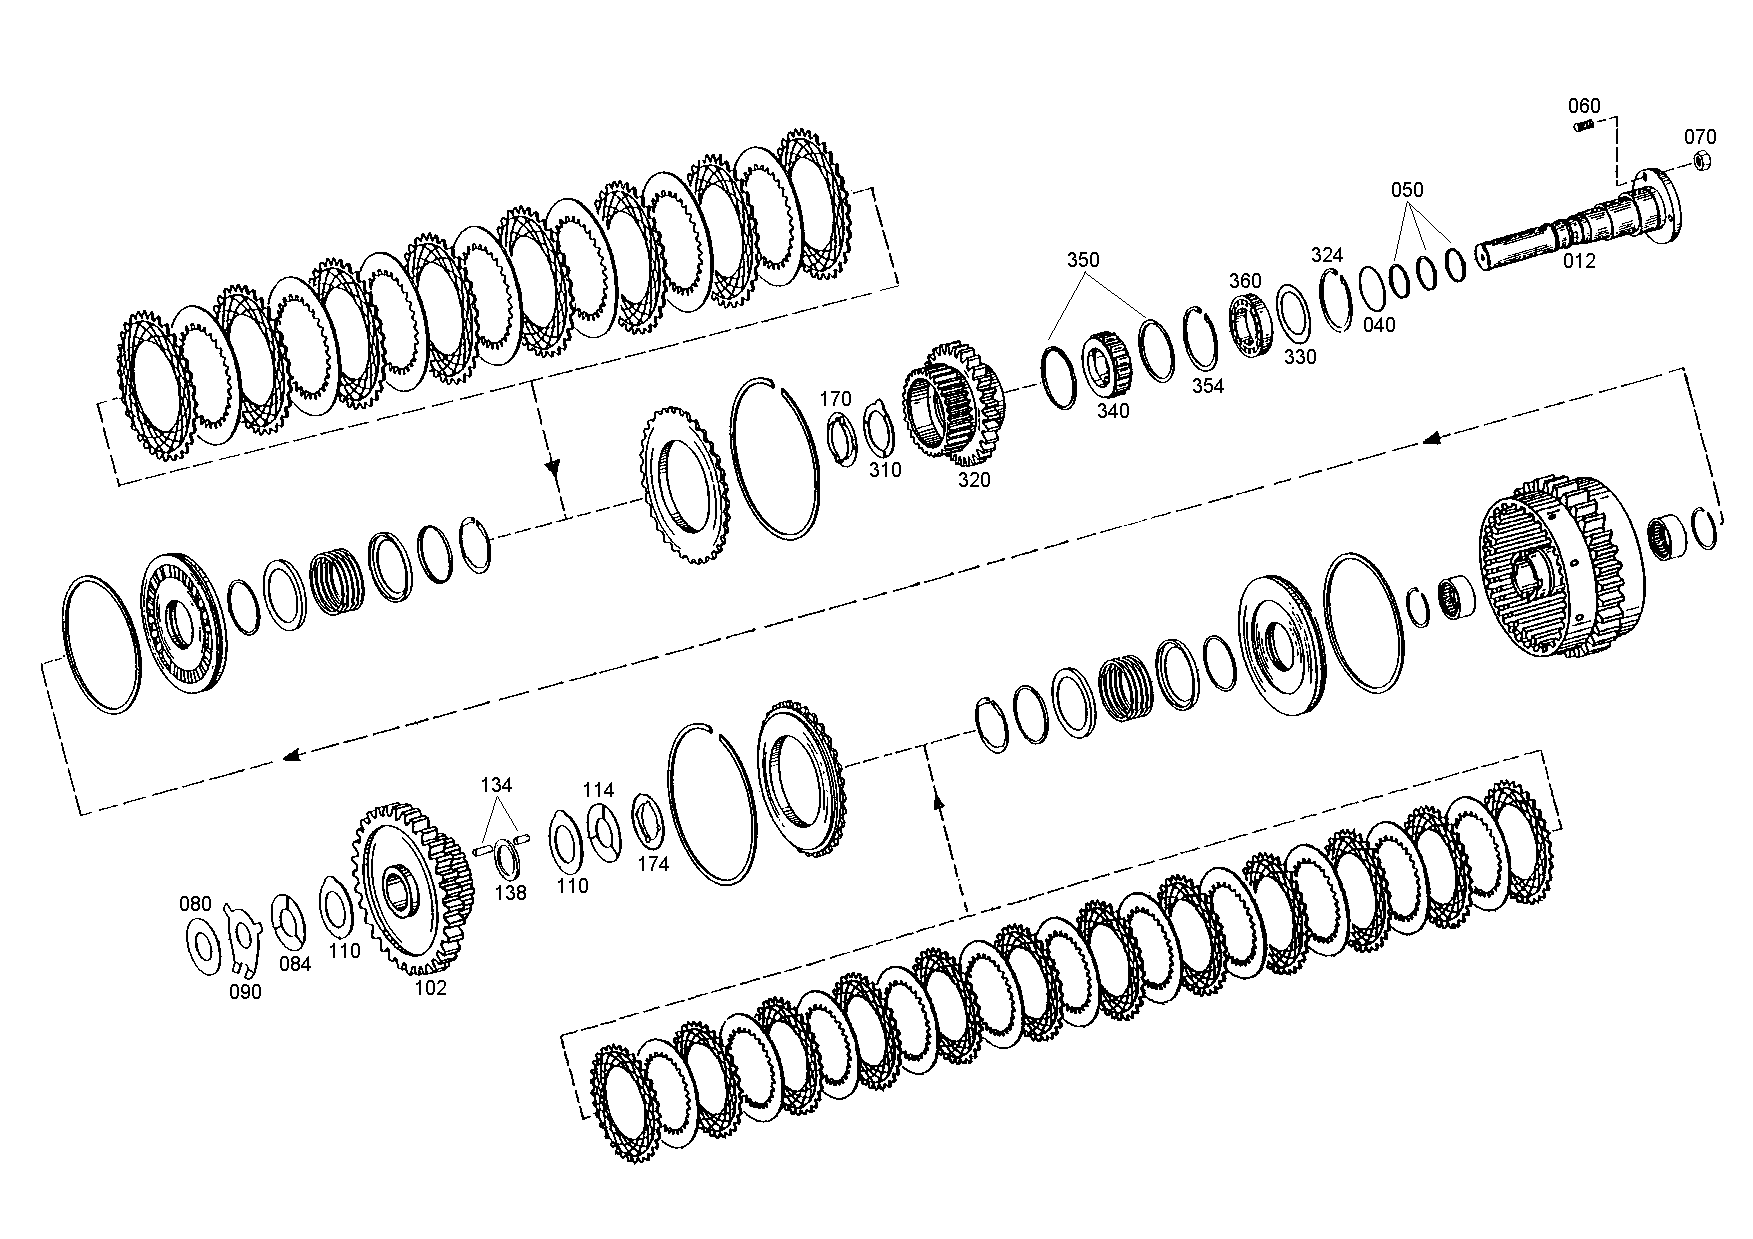 drawing for TEREX EQUIPMENT LIMITED 09398037 - ROLLER CAGE (figure 4)